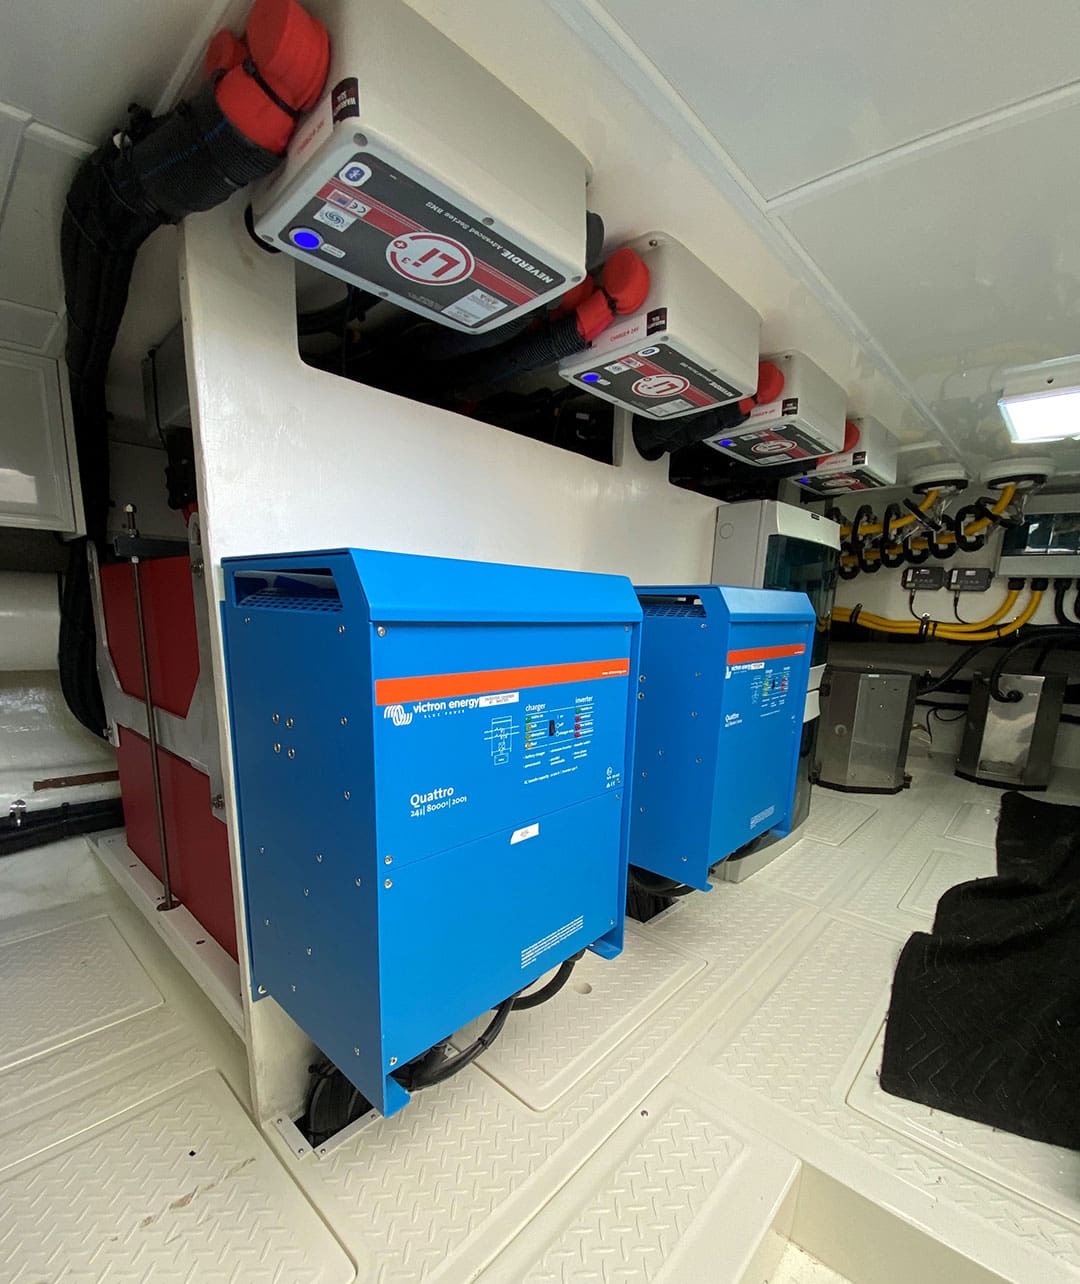 Two battery chargers/inverters and above those, four battery management system units for lithium batteries.